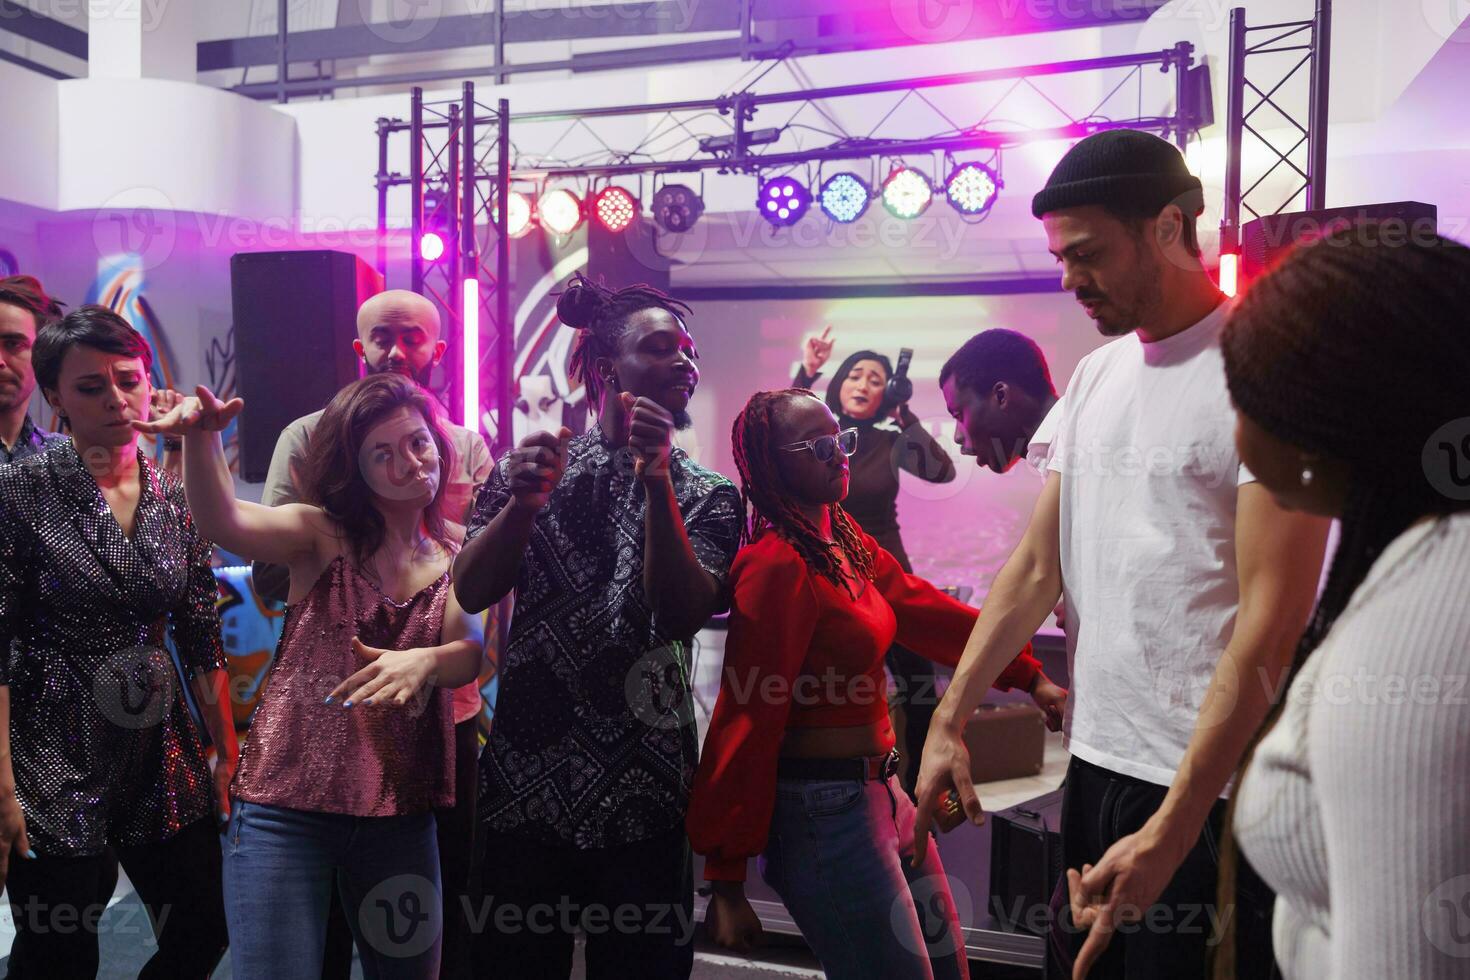 Cheerful young people dancing together at social gathering in nightclub. Happy men and women crowd clubbing and partying on dancefloor while attending discotheque in club photo